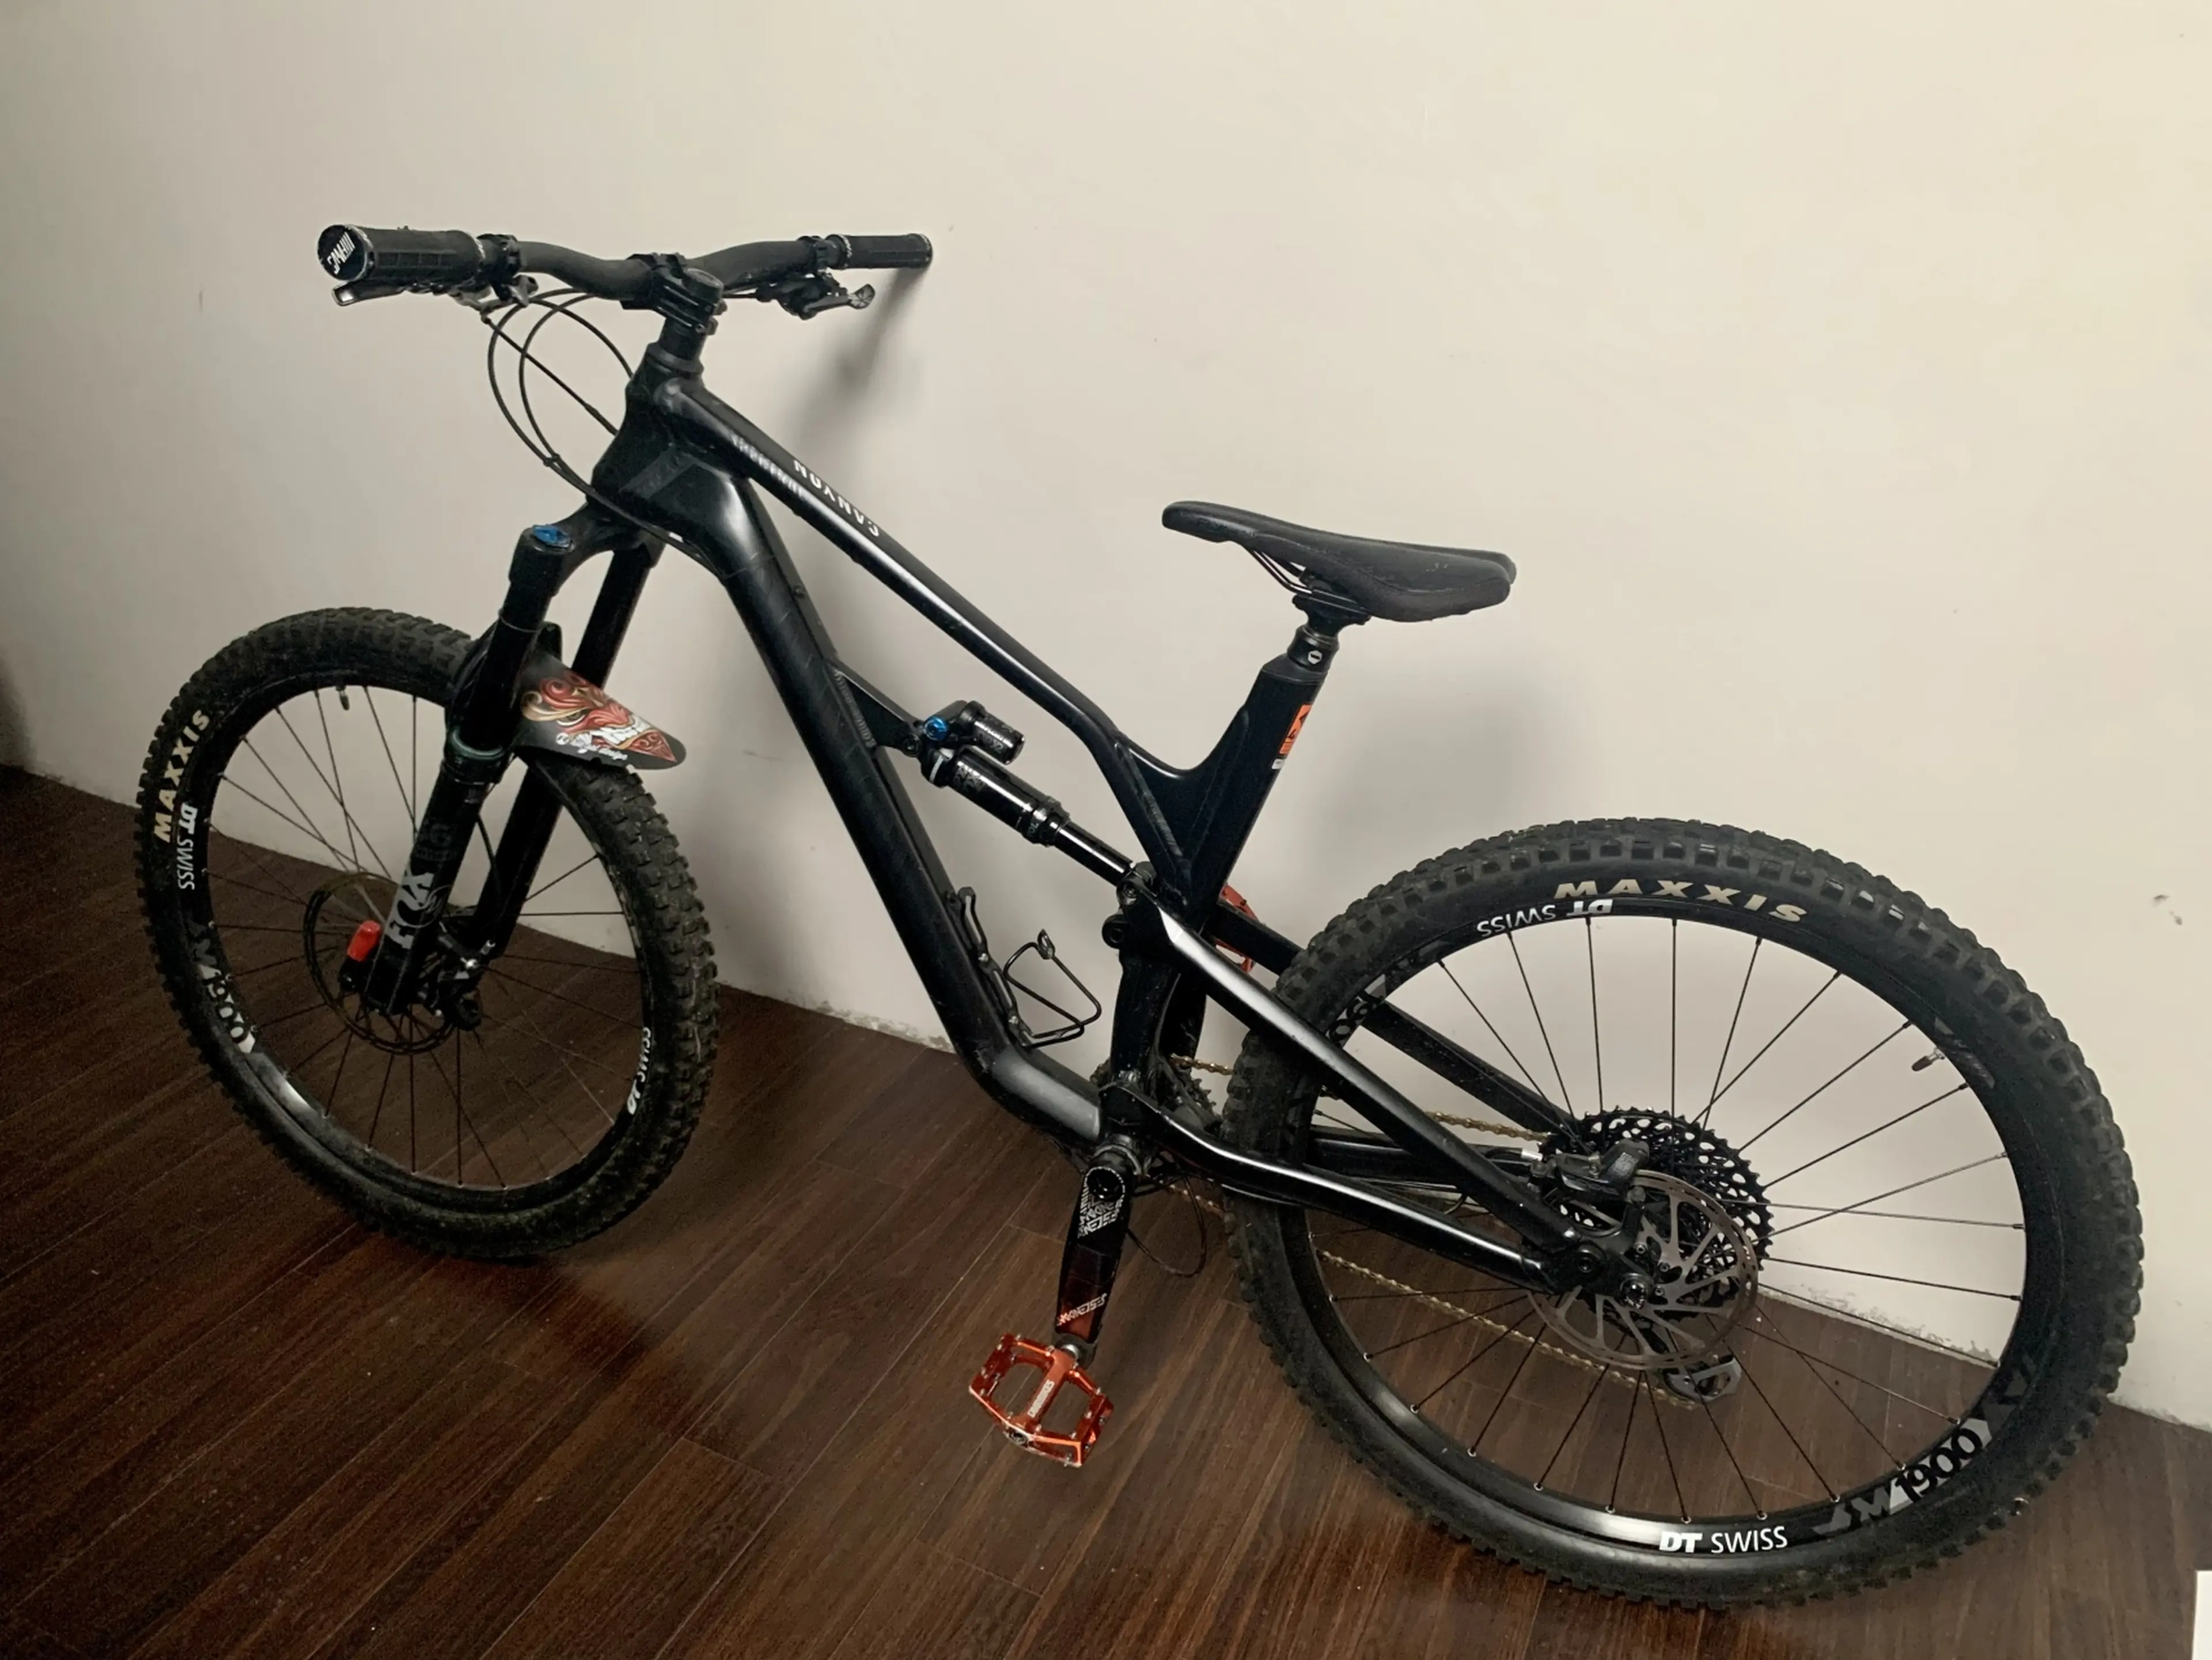 1. Vand Full-Suspension Canyon Spectral AL 6.0